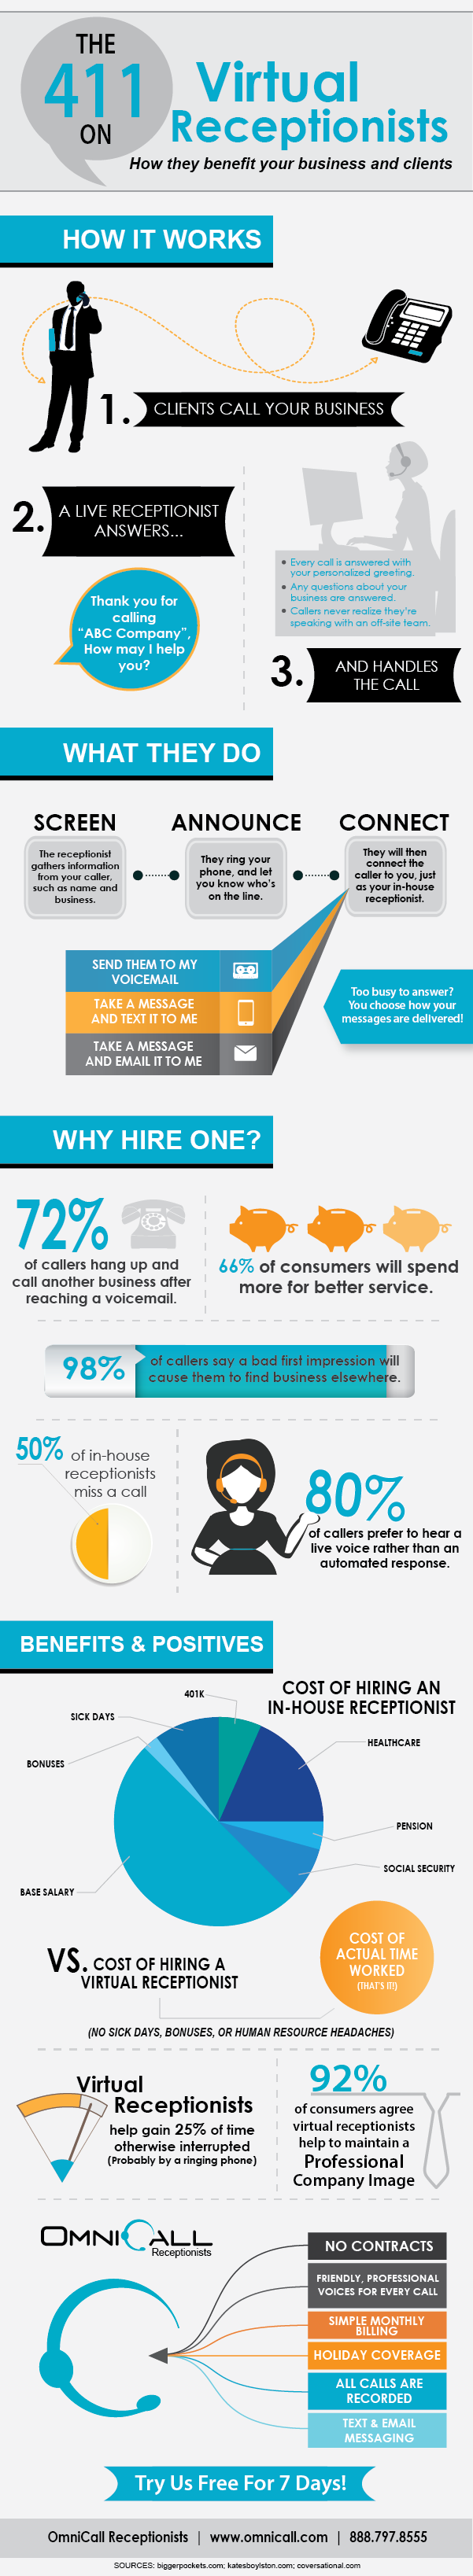 virtual receptionist infographic, virtual receptionist answering services